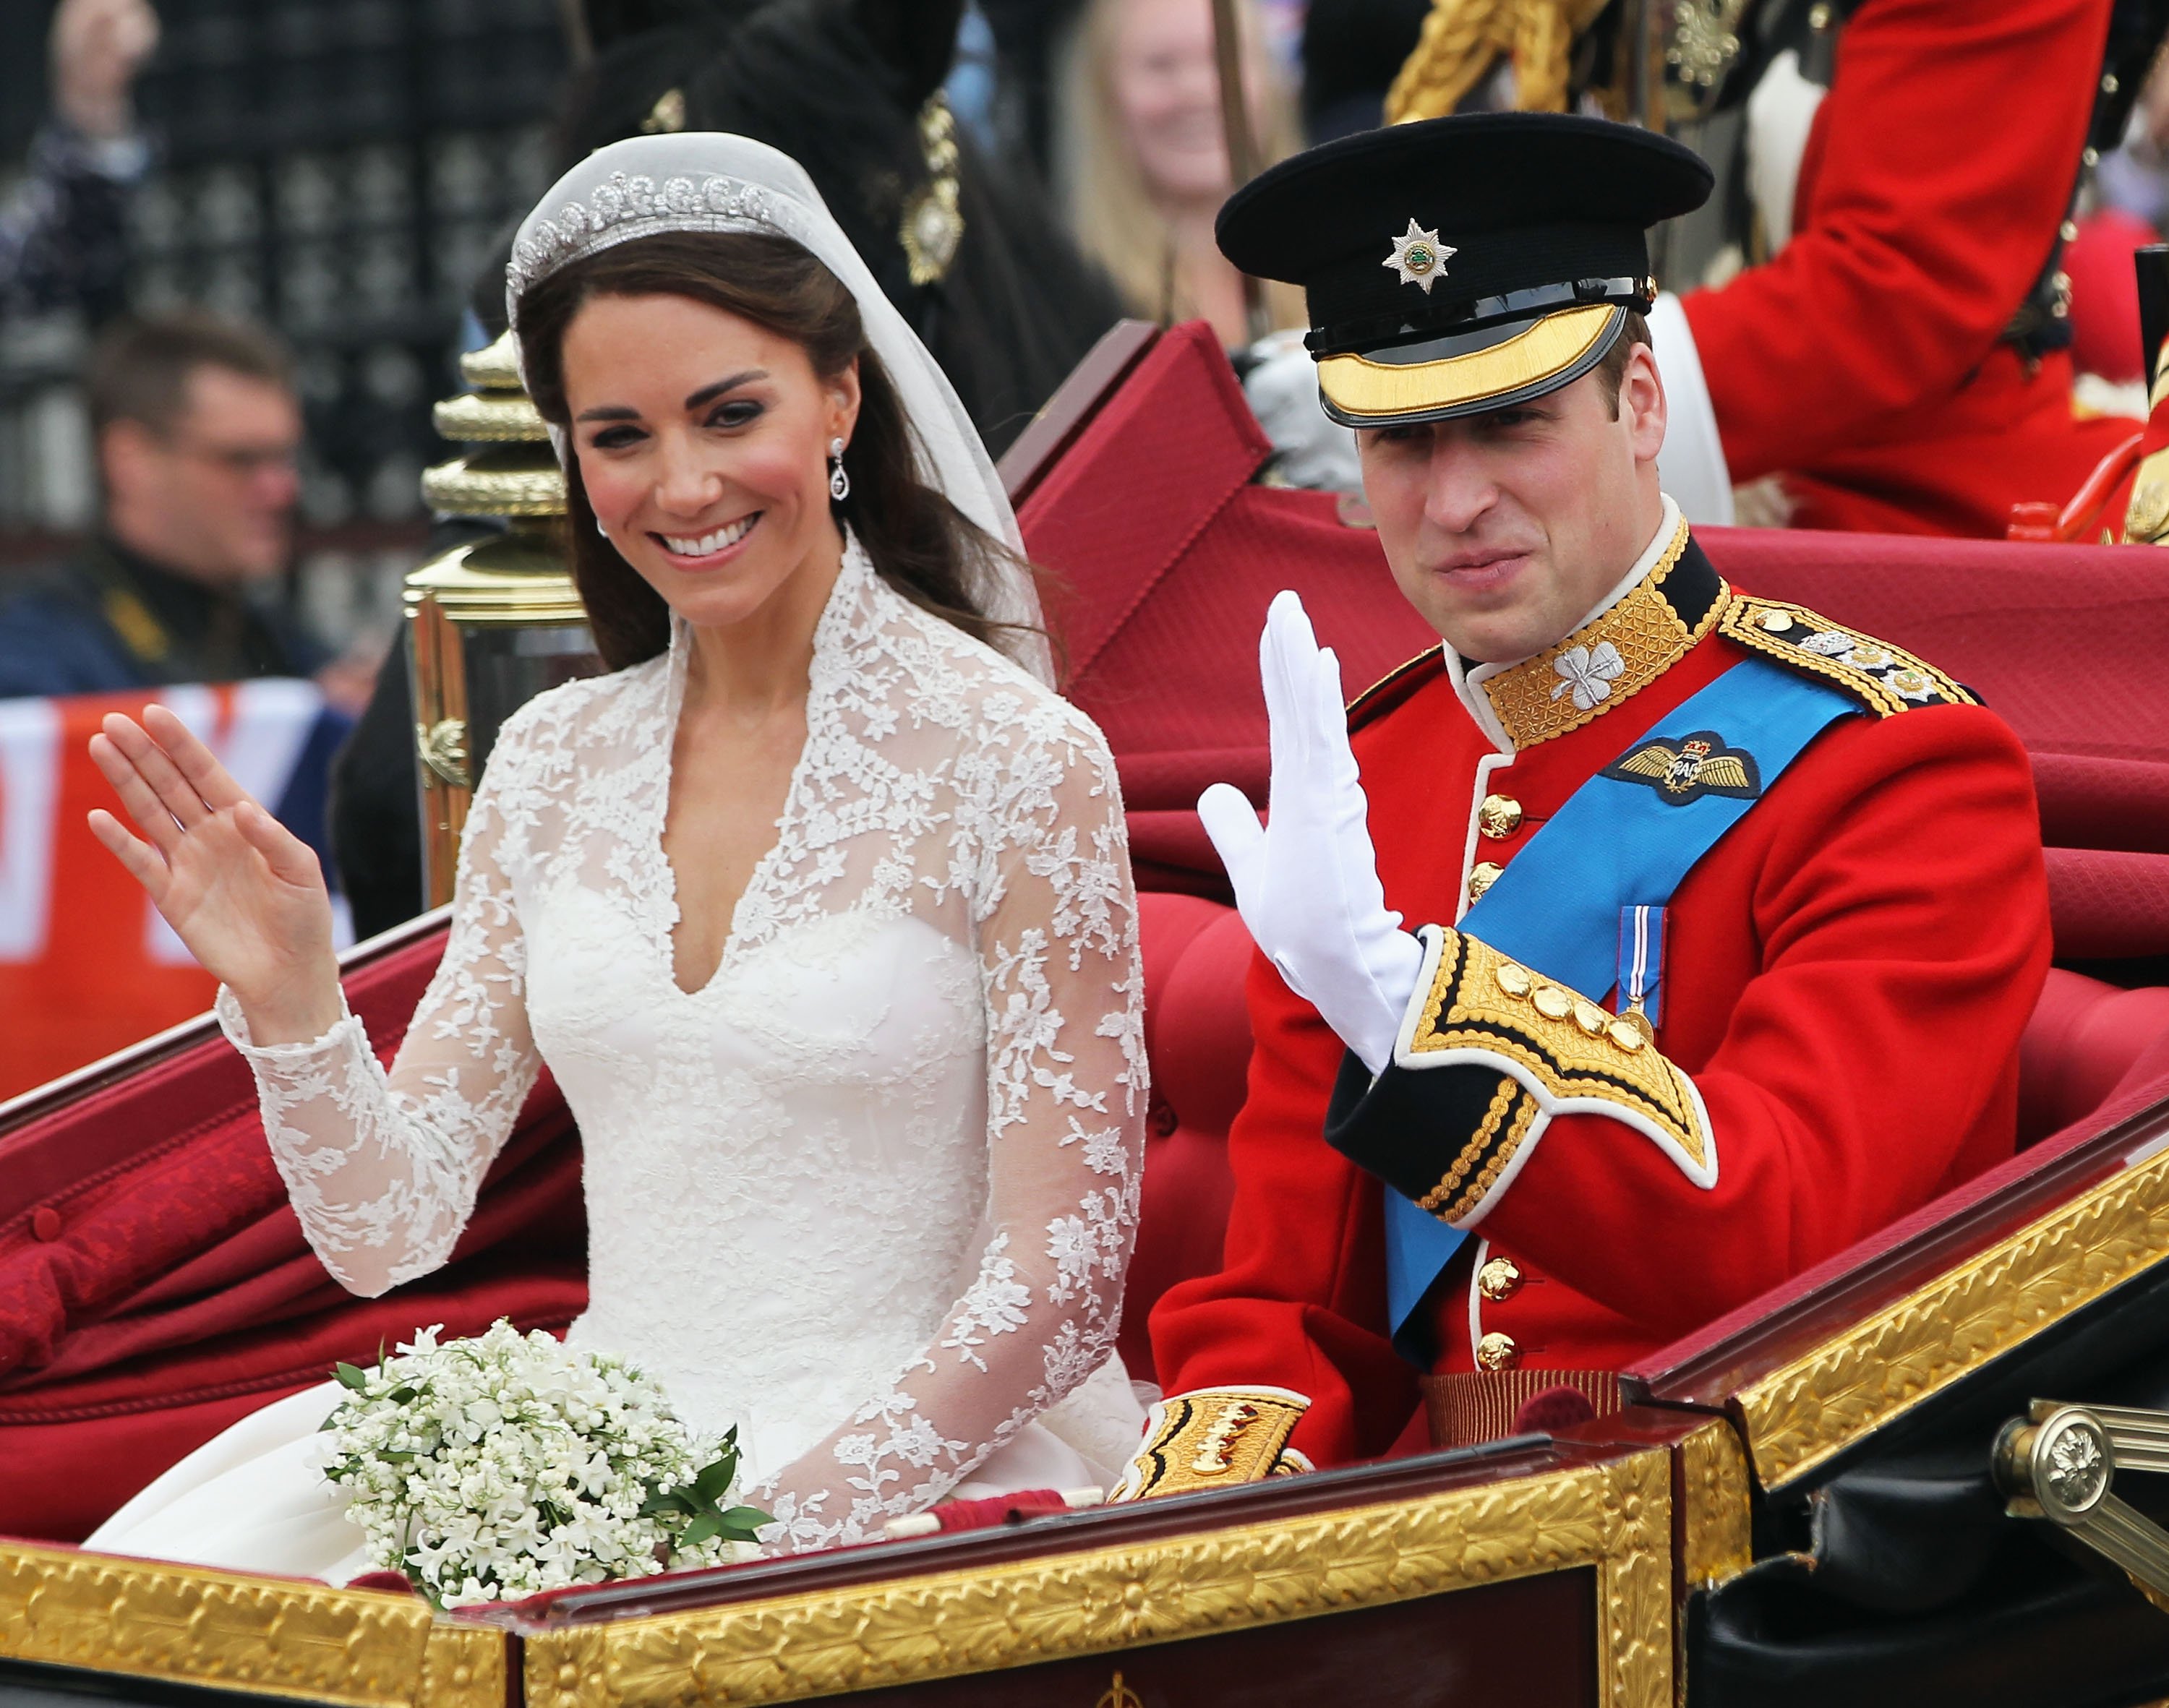 Prince William, Duke of Cambridge and Catherine, Duchess of Cambridge journey by carriage procession to Buckingham Palace following their marriage at Westminster Abbey on April 29, 2011 in London, England. | Photo: GettyImages 